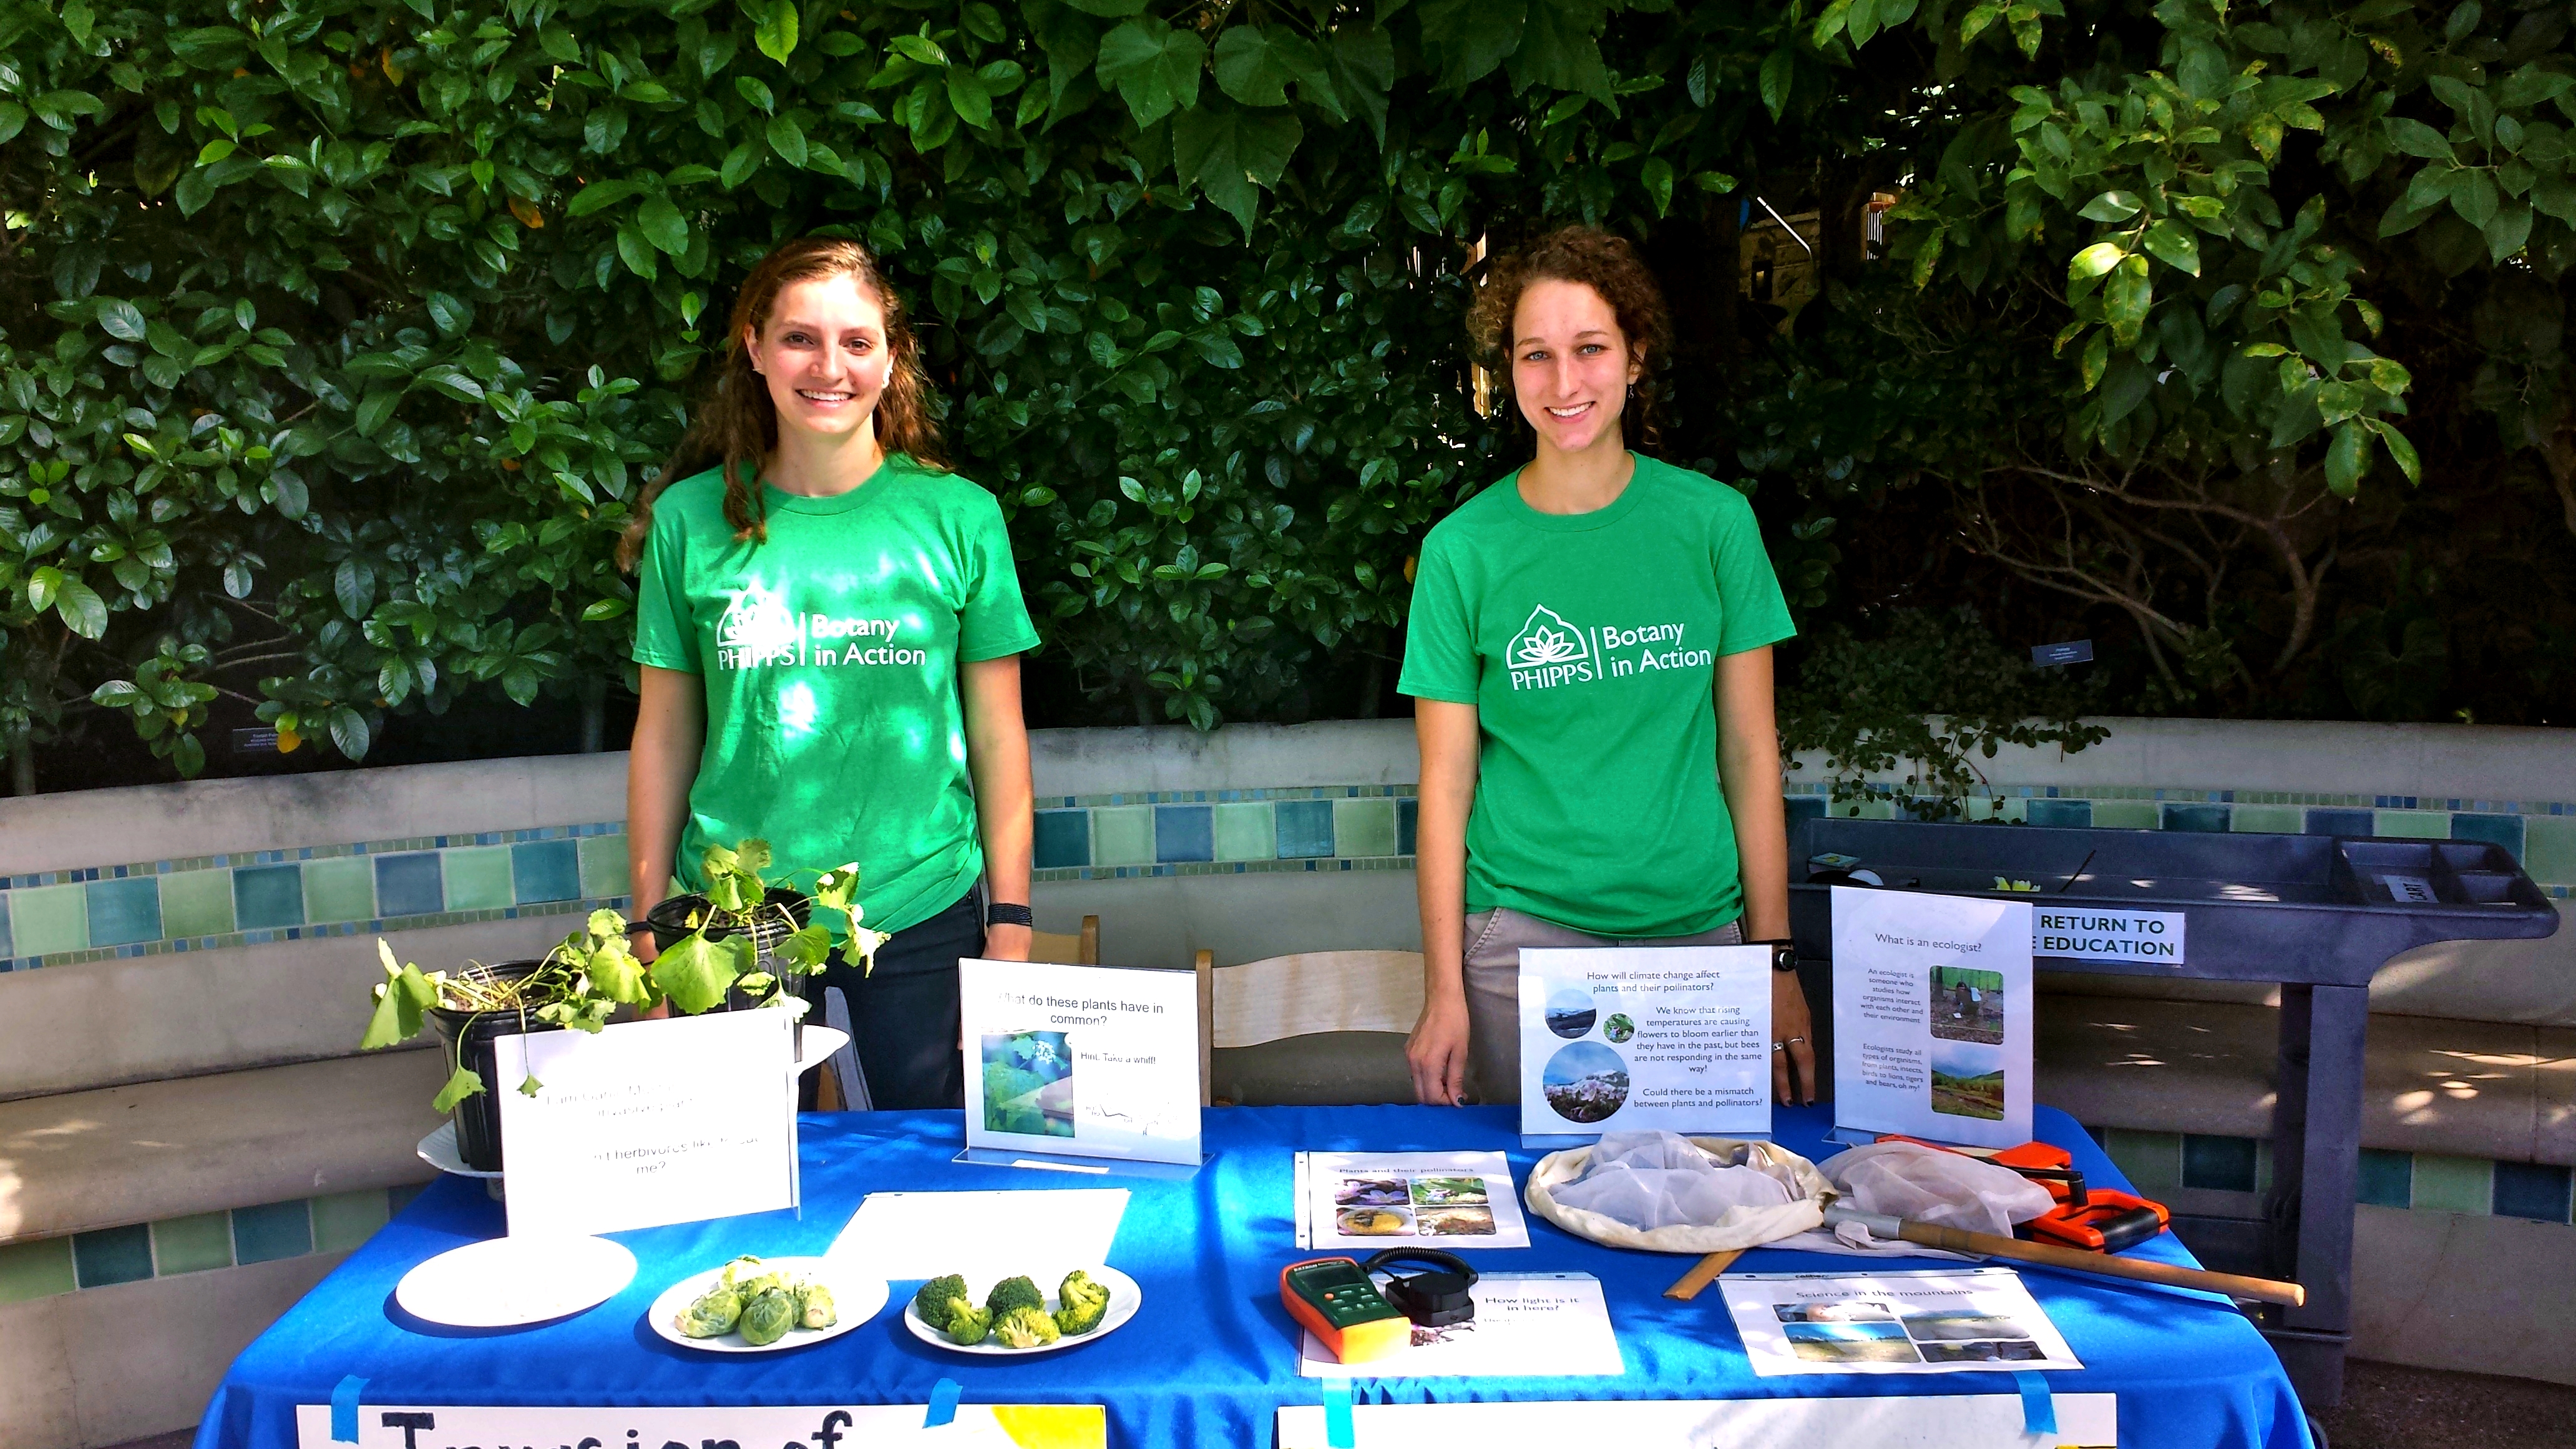 Morgan Roche (left) and Rebecca Dalton (right) tabling at an event in the Tropical Forest.